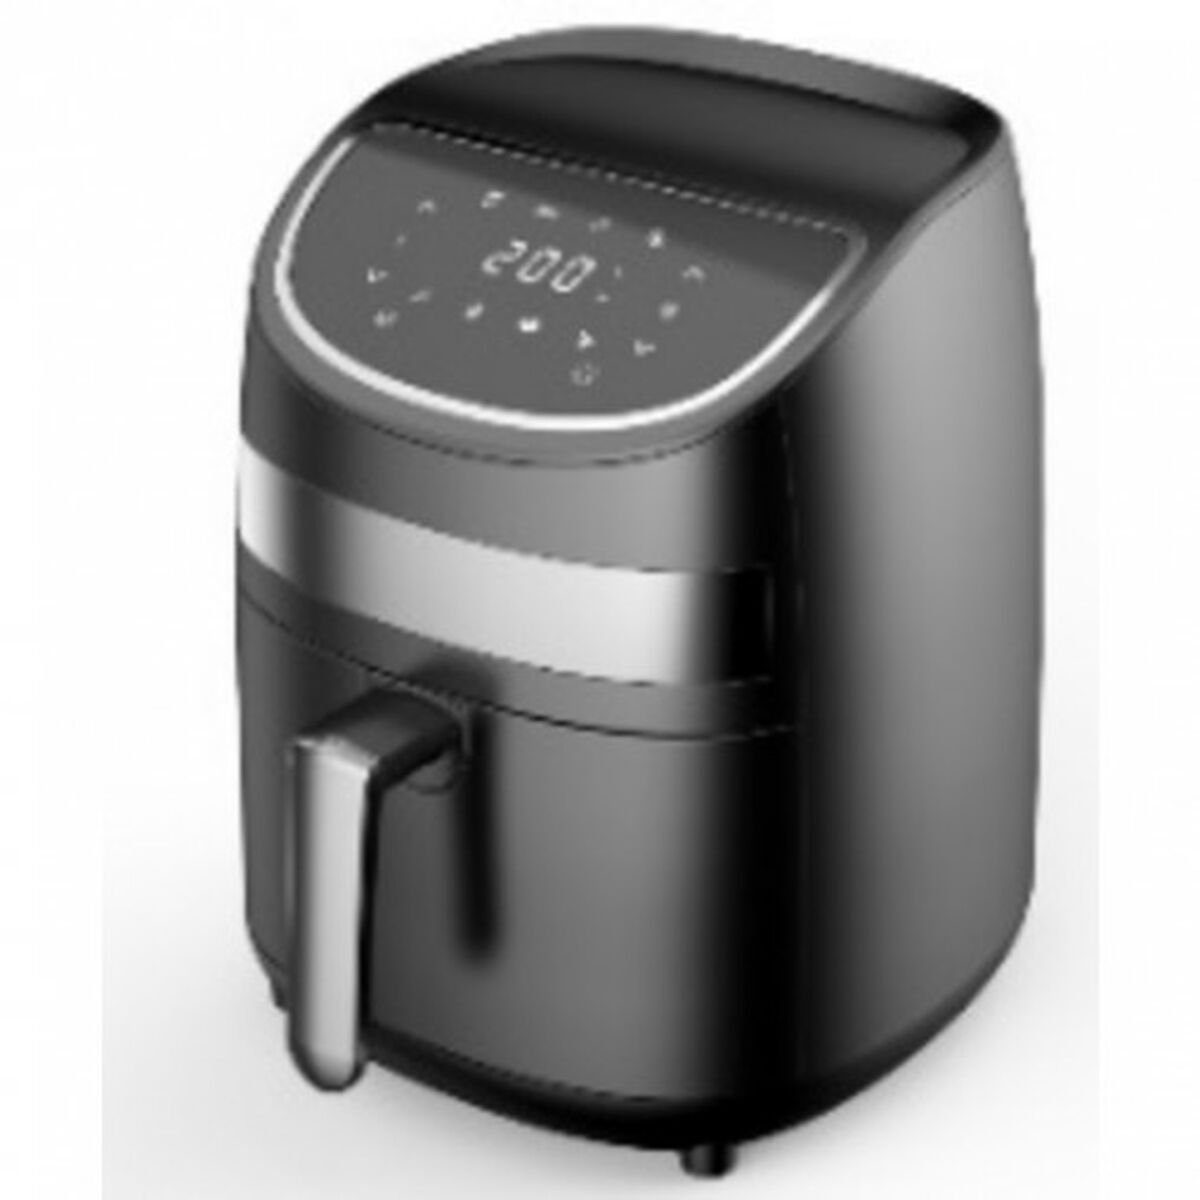 Comelec Fritteuse Airfryer Heißluft Fritteuse ohne Öl COMELEC FA4040, 1200 W